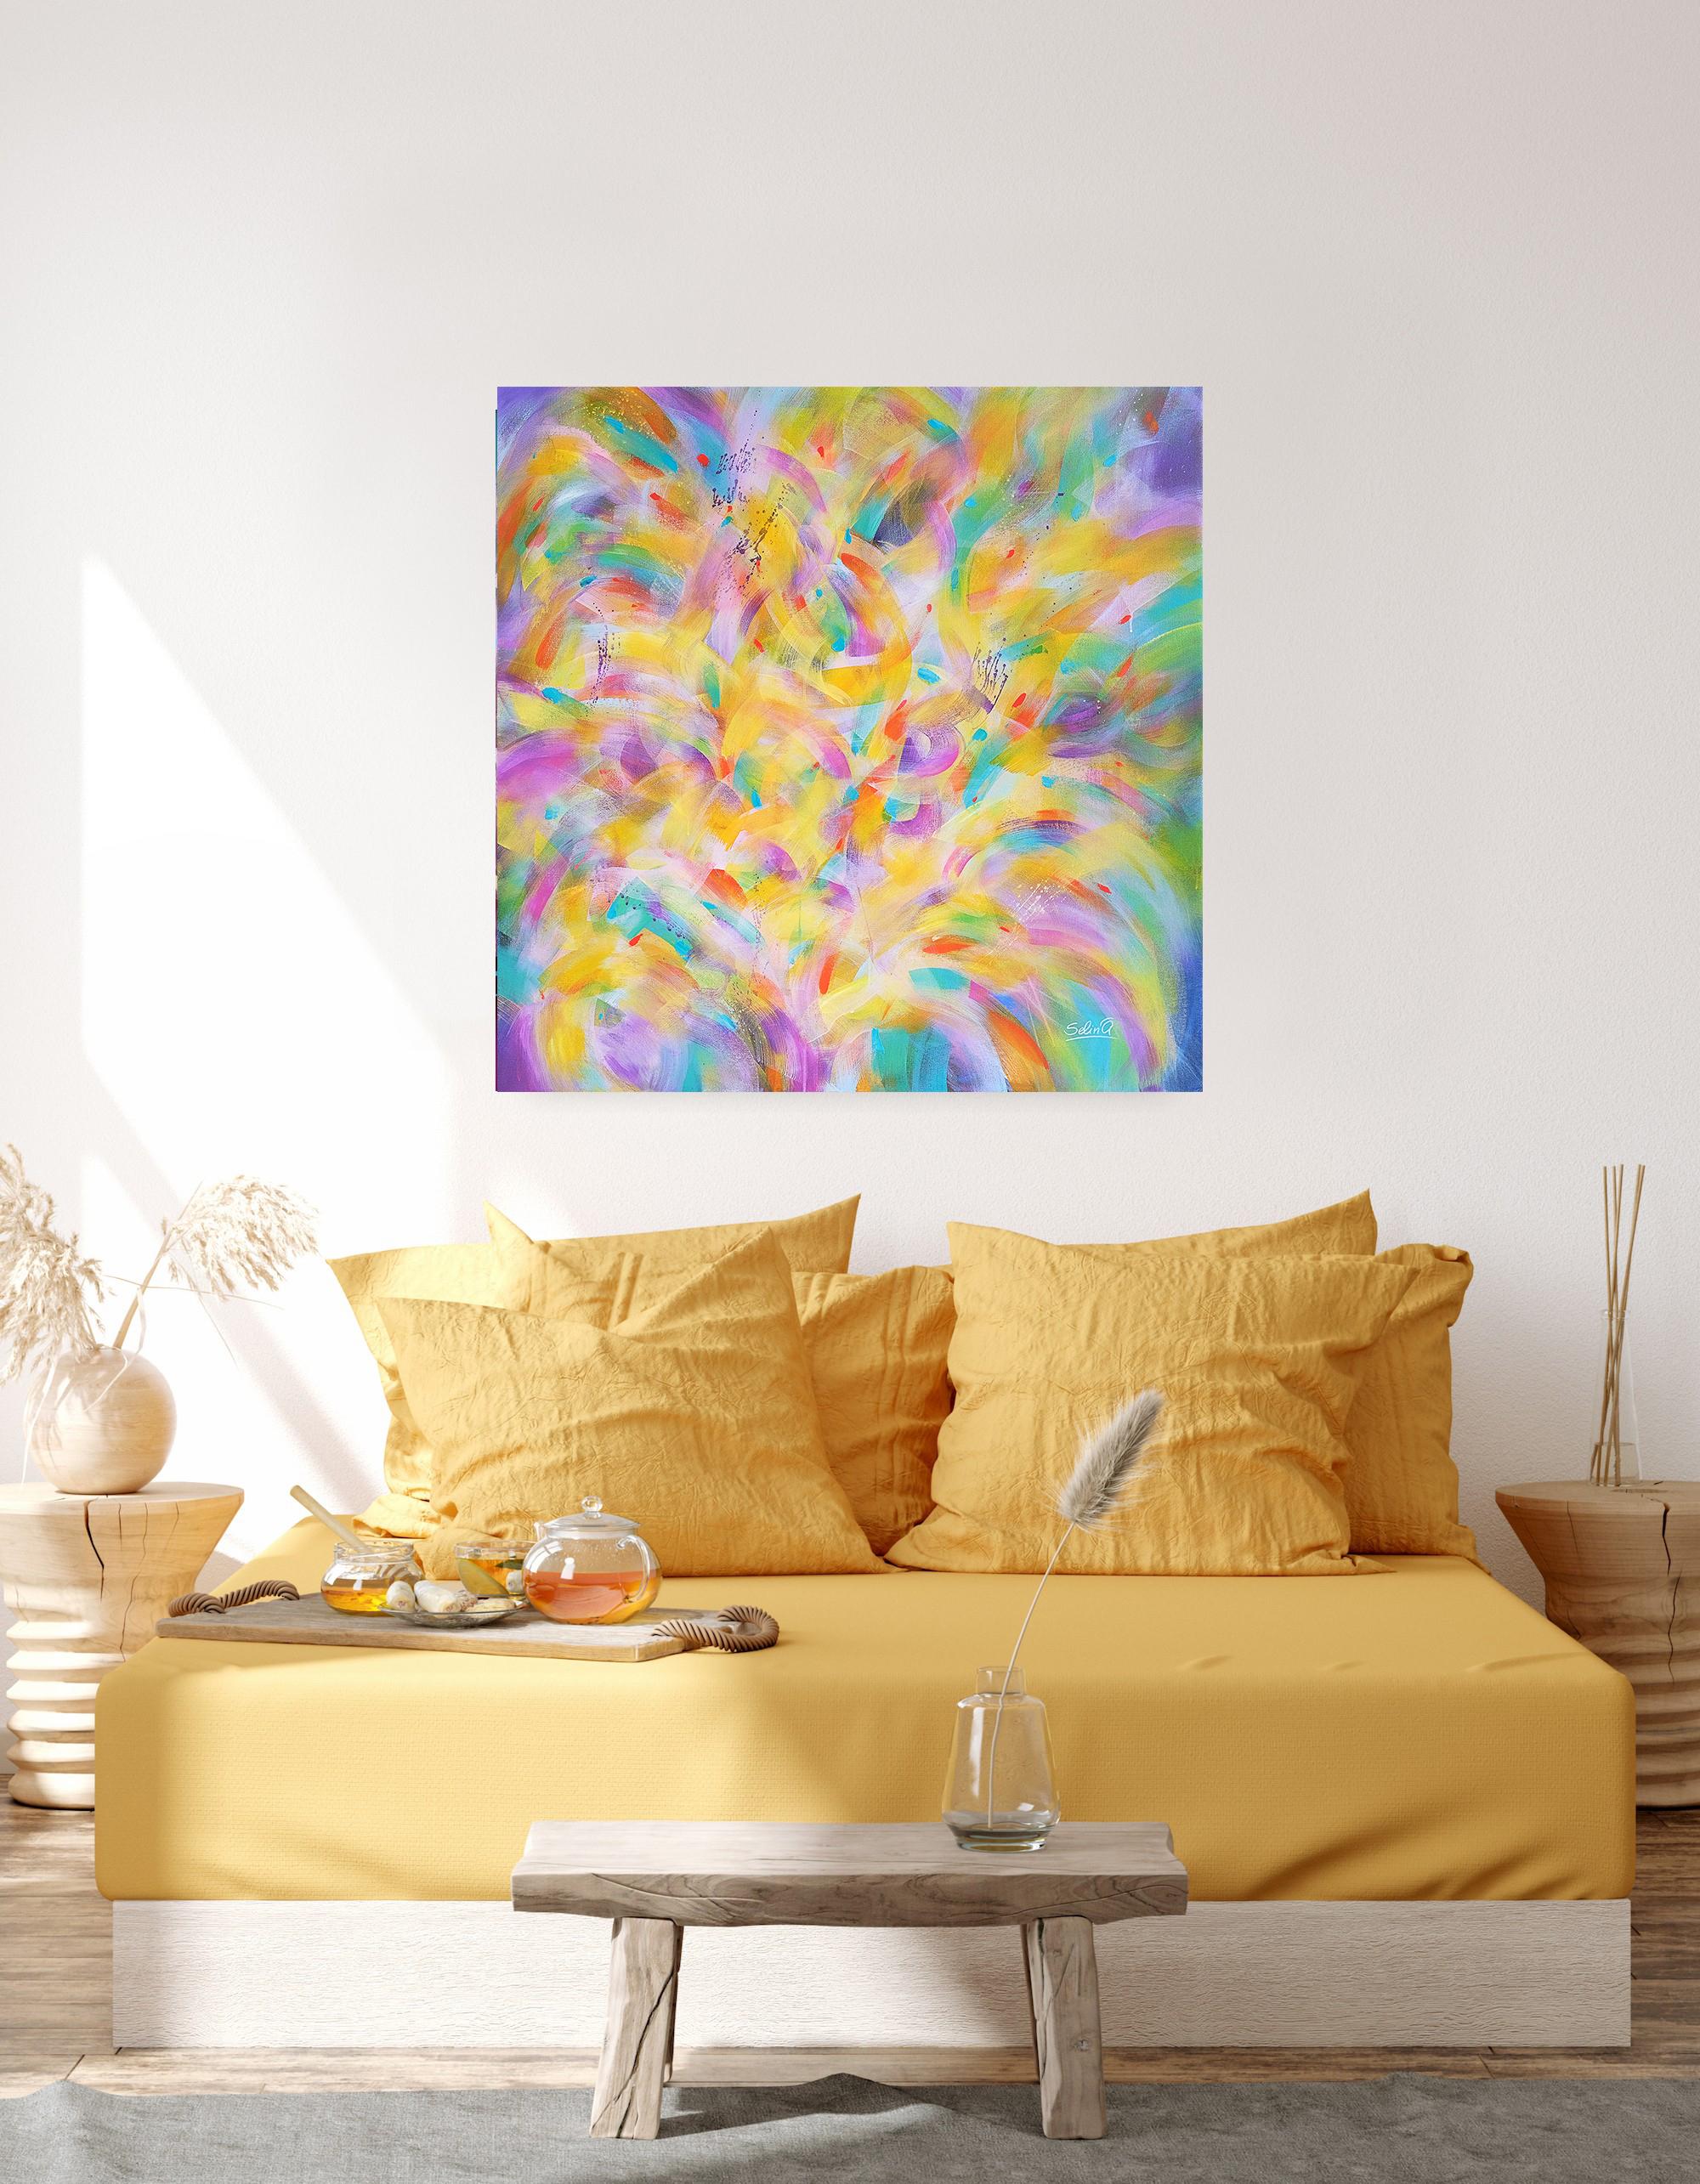 Spring light, Modern Colorful Abstract Painting 100x100cm by Anna Selina 6